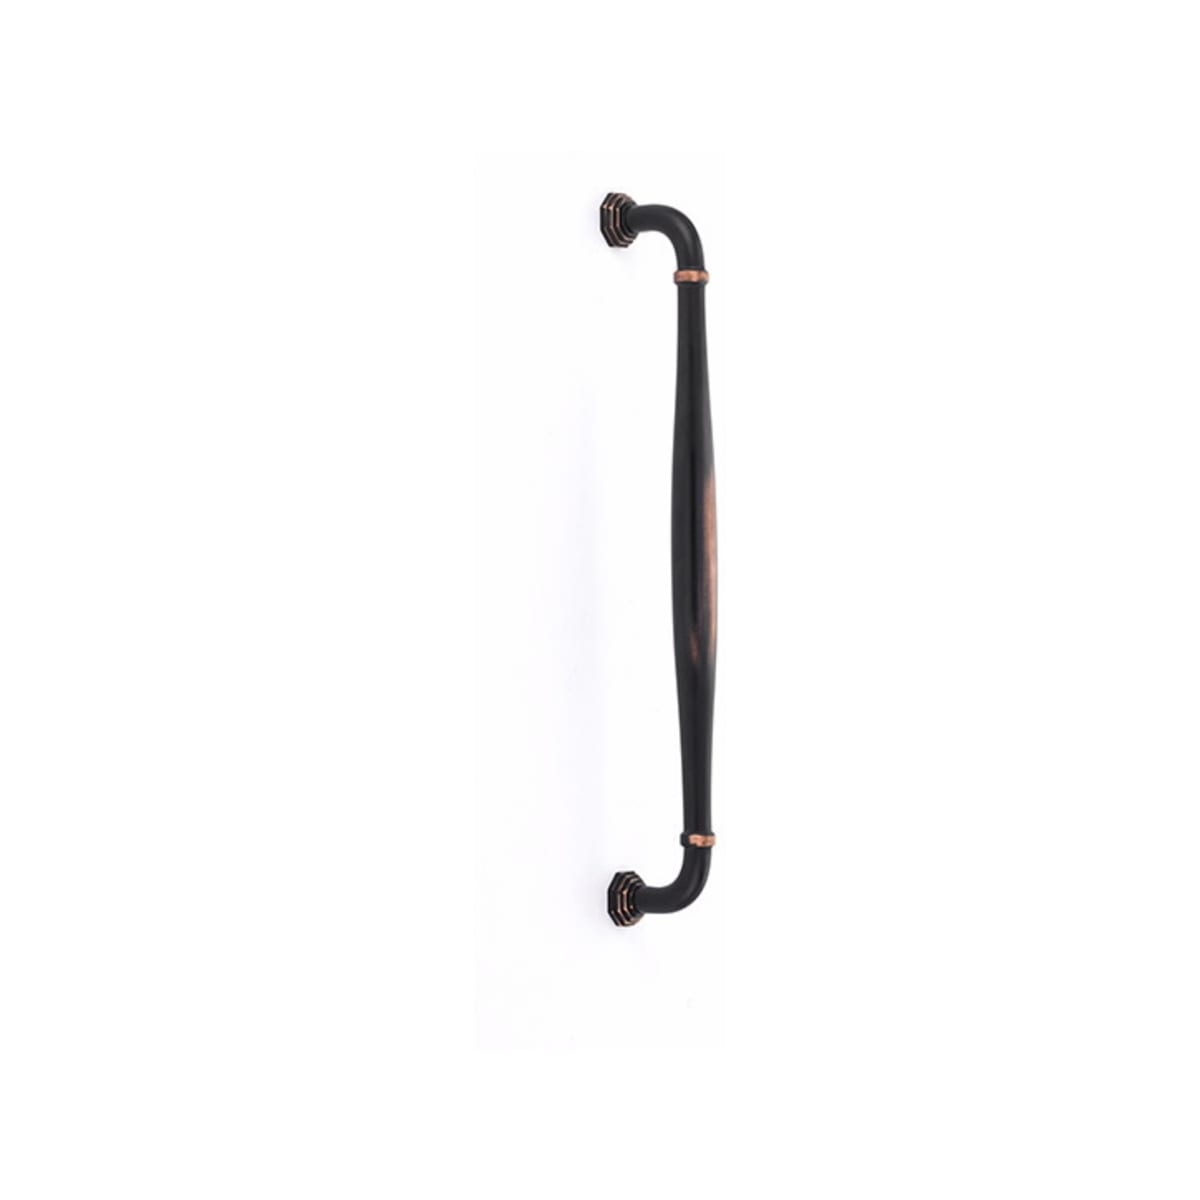 86910US10B - Blythe Appliance Pull - 12" - Oil Rubbed Bronze